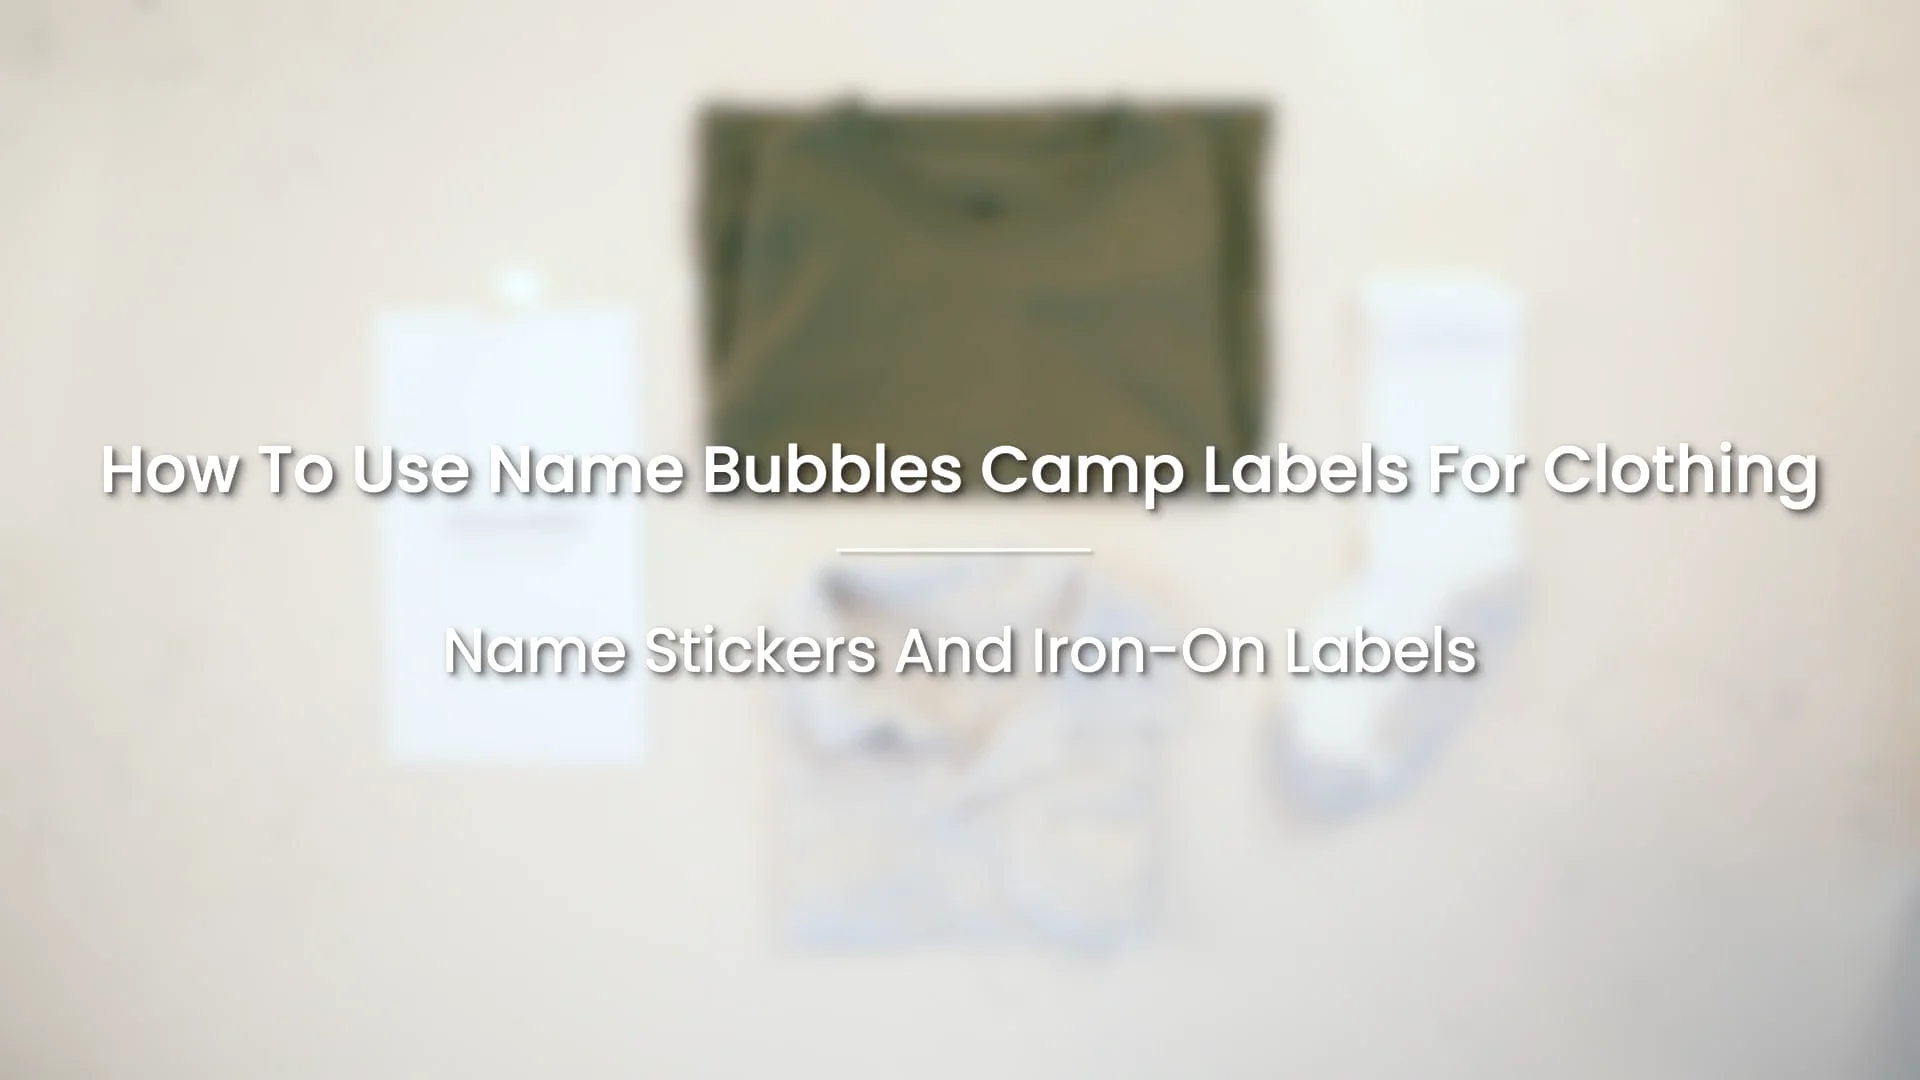 Custom Labels: Two-tone Labels for Camp Clothing